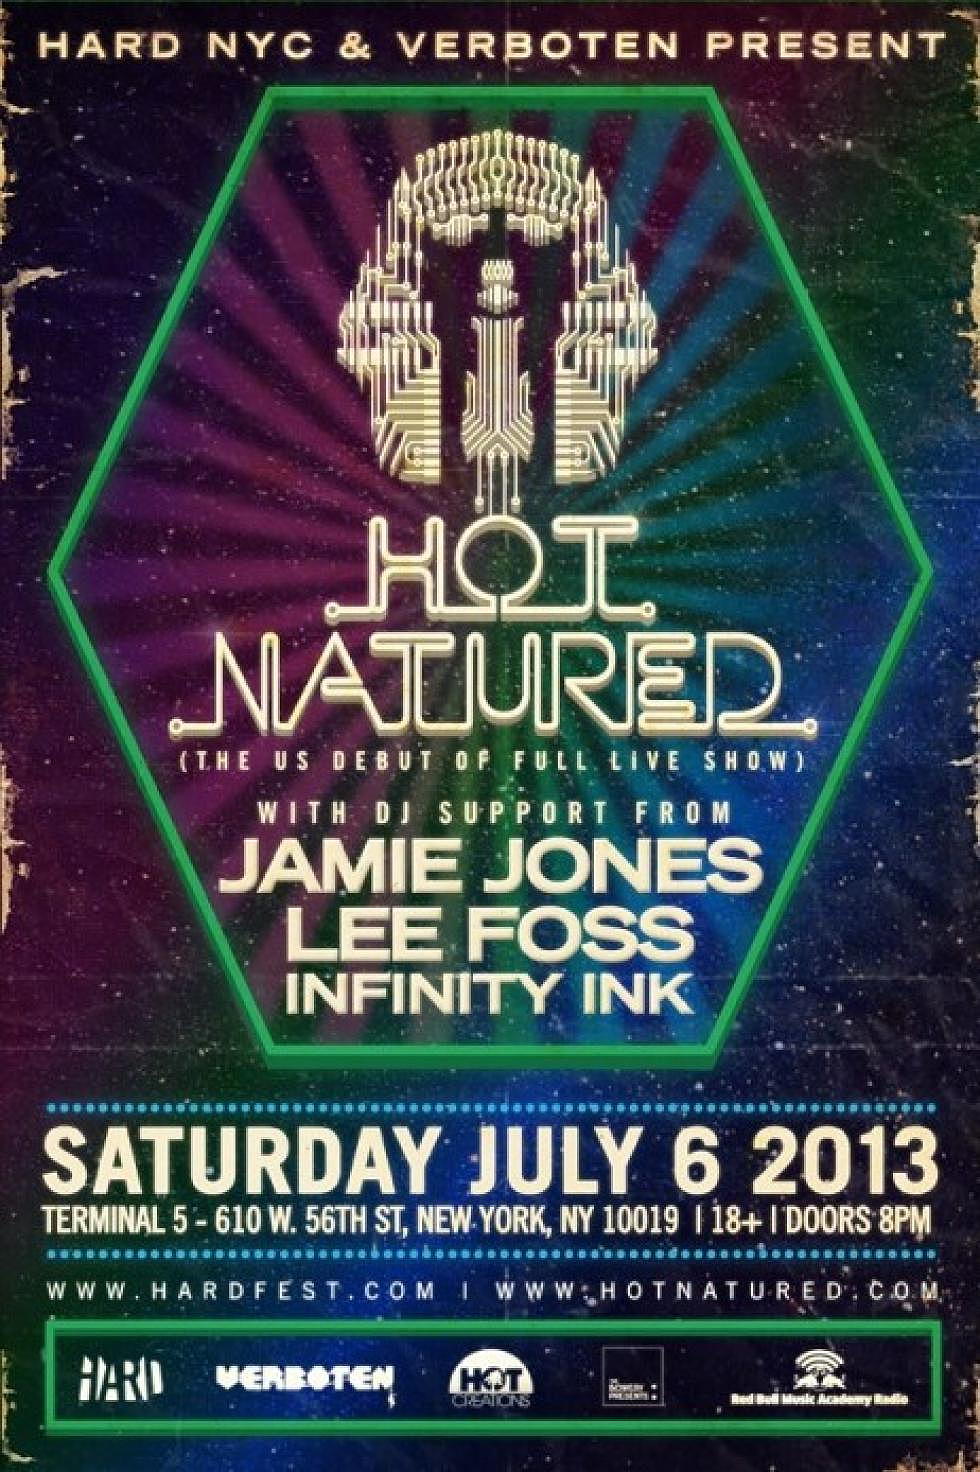 HARD Presents Hot Natured U.S. Full Live Show Debut Saturday, July 6th at Terminal 5 in NYC